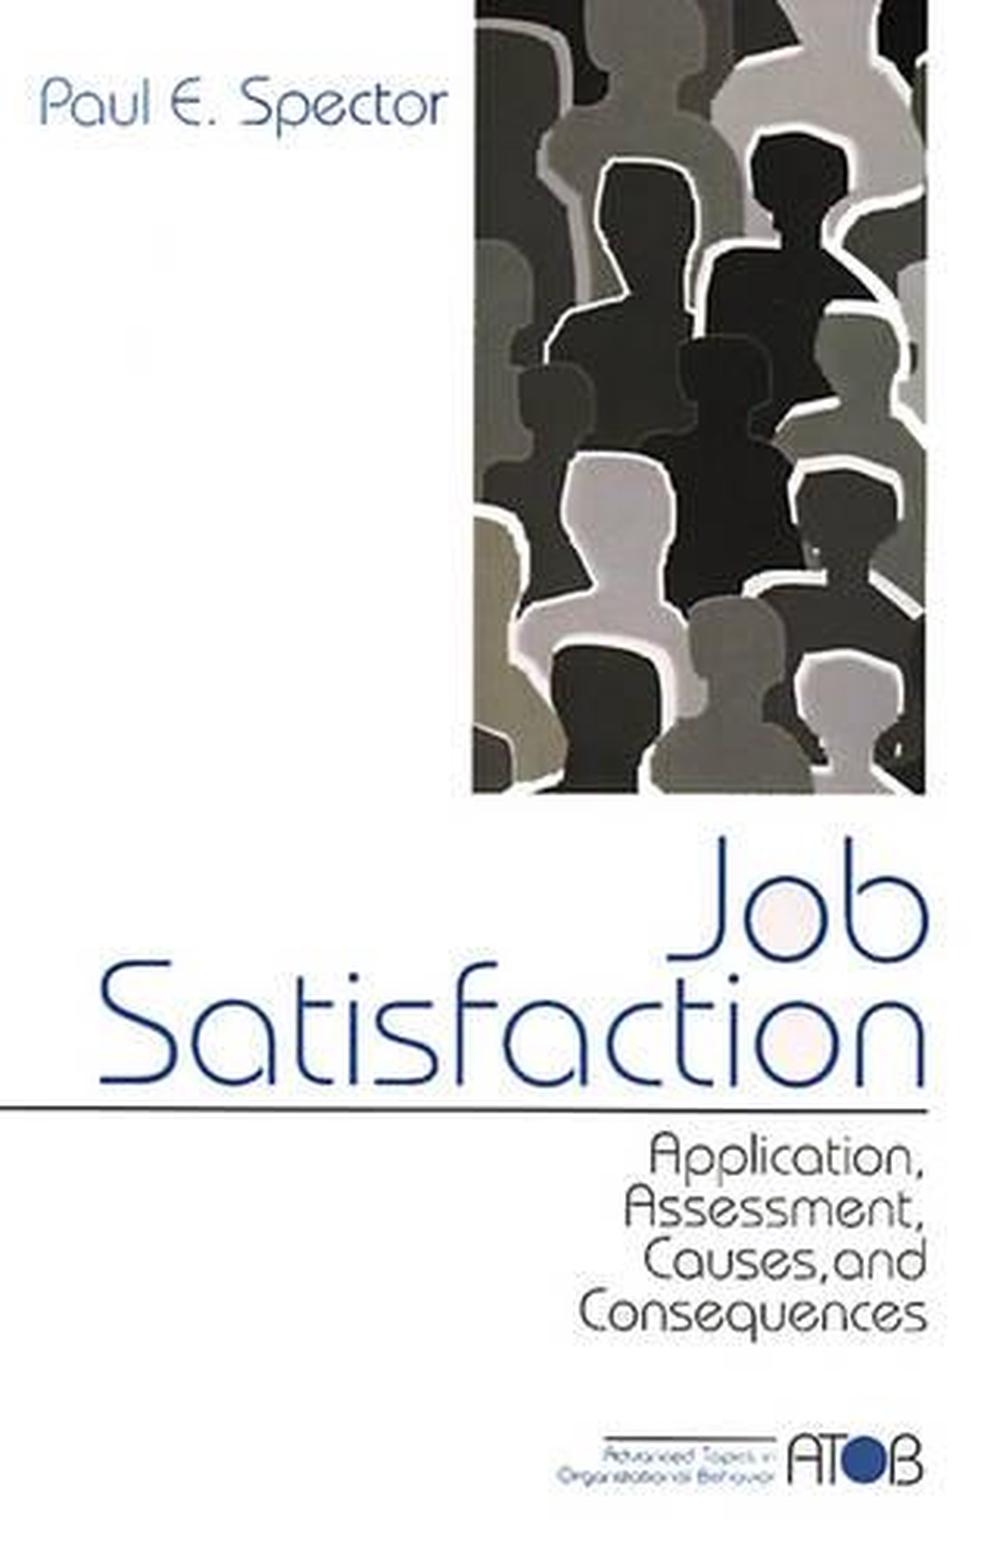 research title about job satisfaction